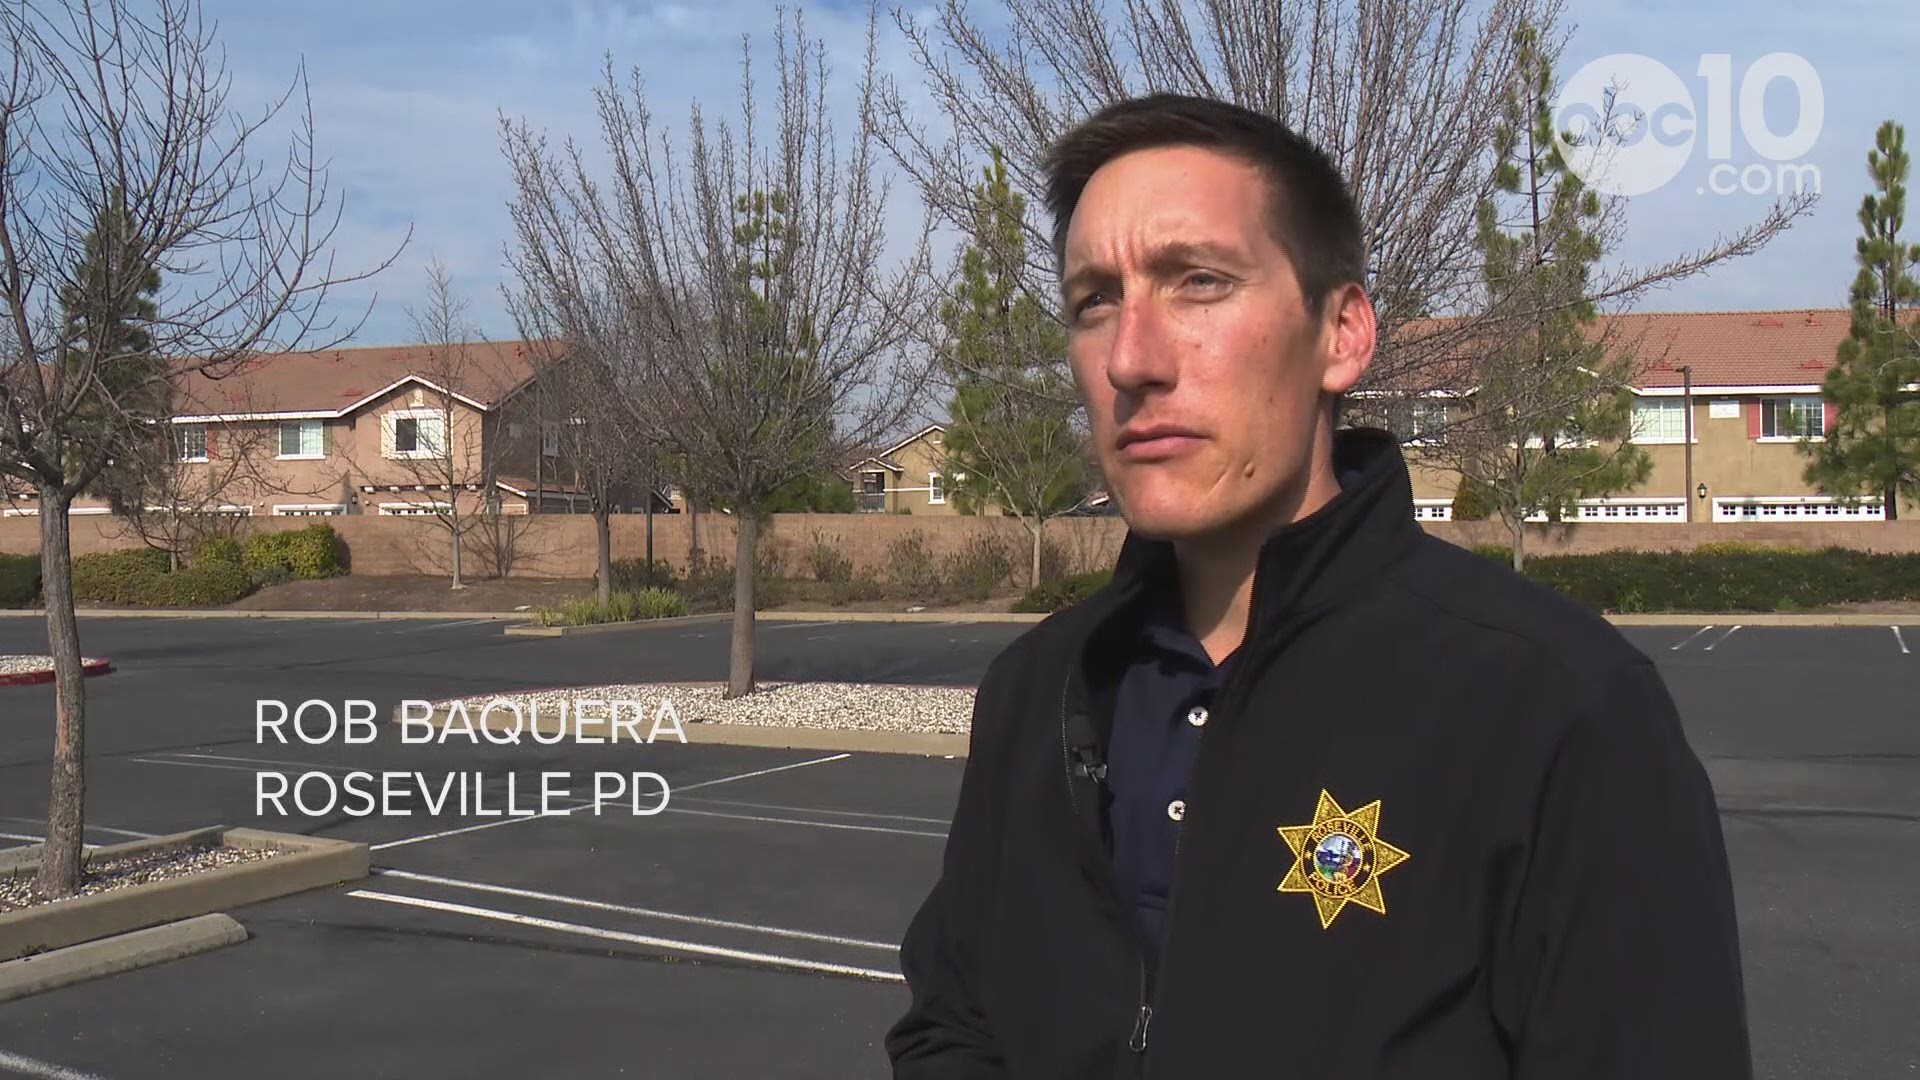 Roseville Police Officer Rob Baquera provides an update on the standoff at a home on Stonecrest Drive in West Roseville.